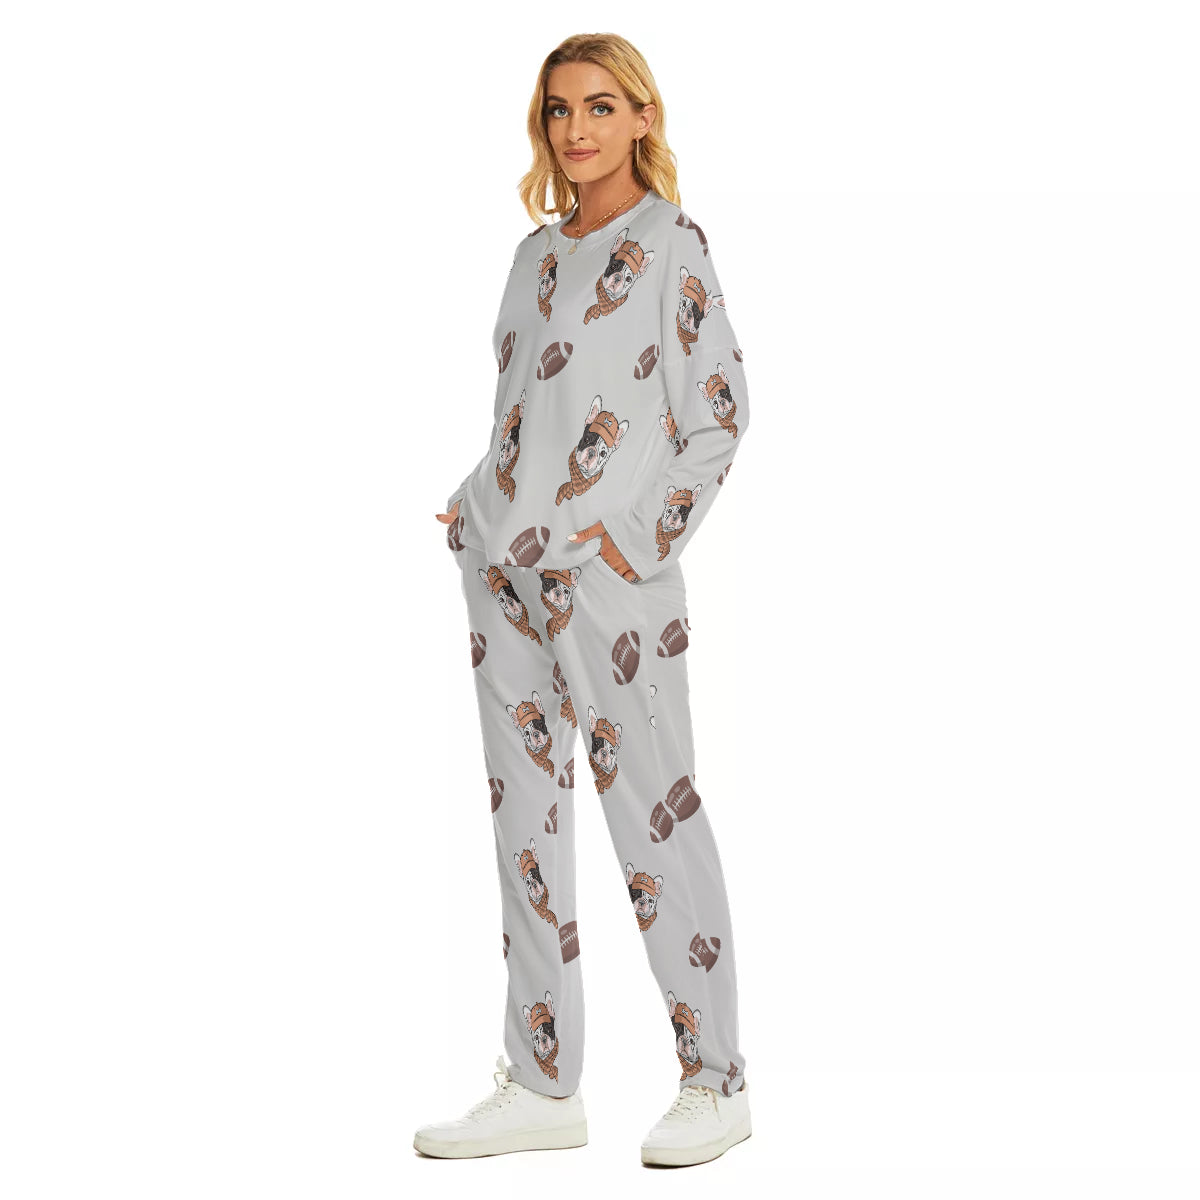 MISSY - Women's Home Service Suit - Frenchie Bulldog Shop